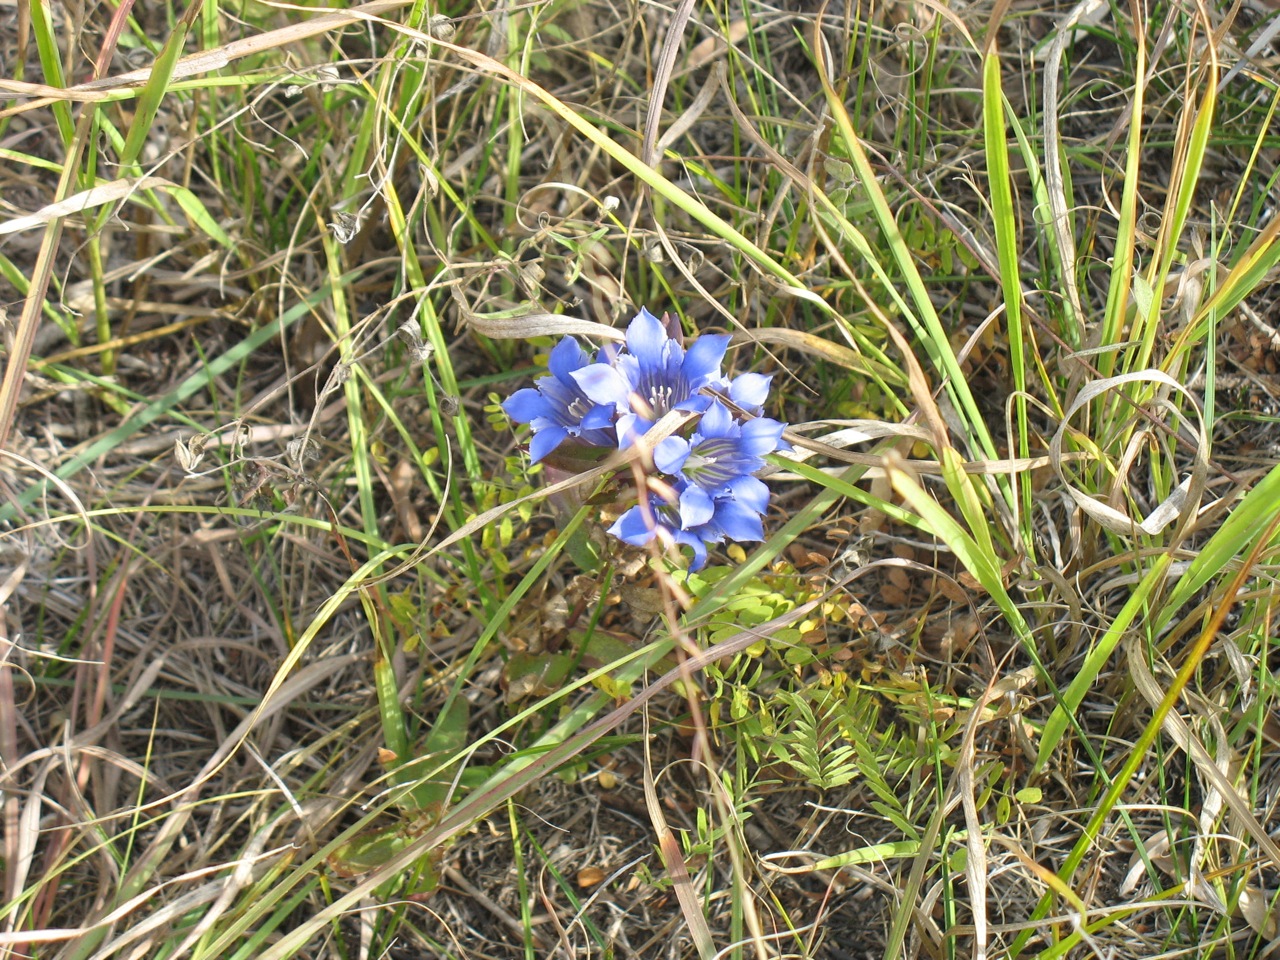 The fringed gentian.